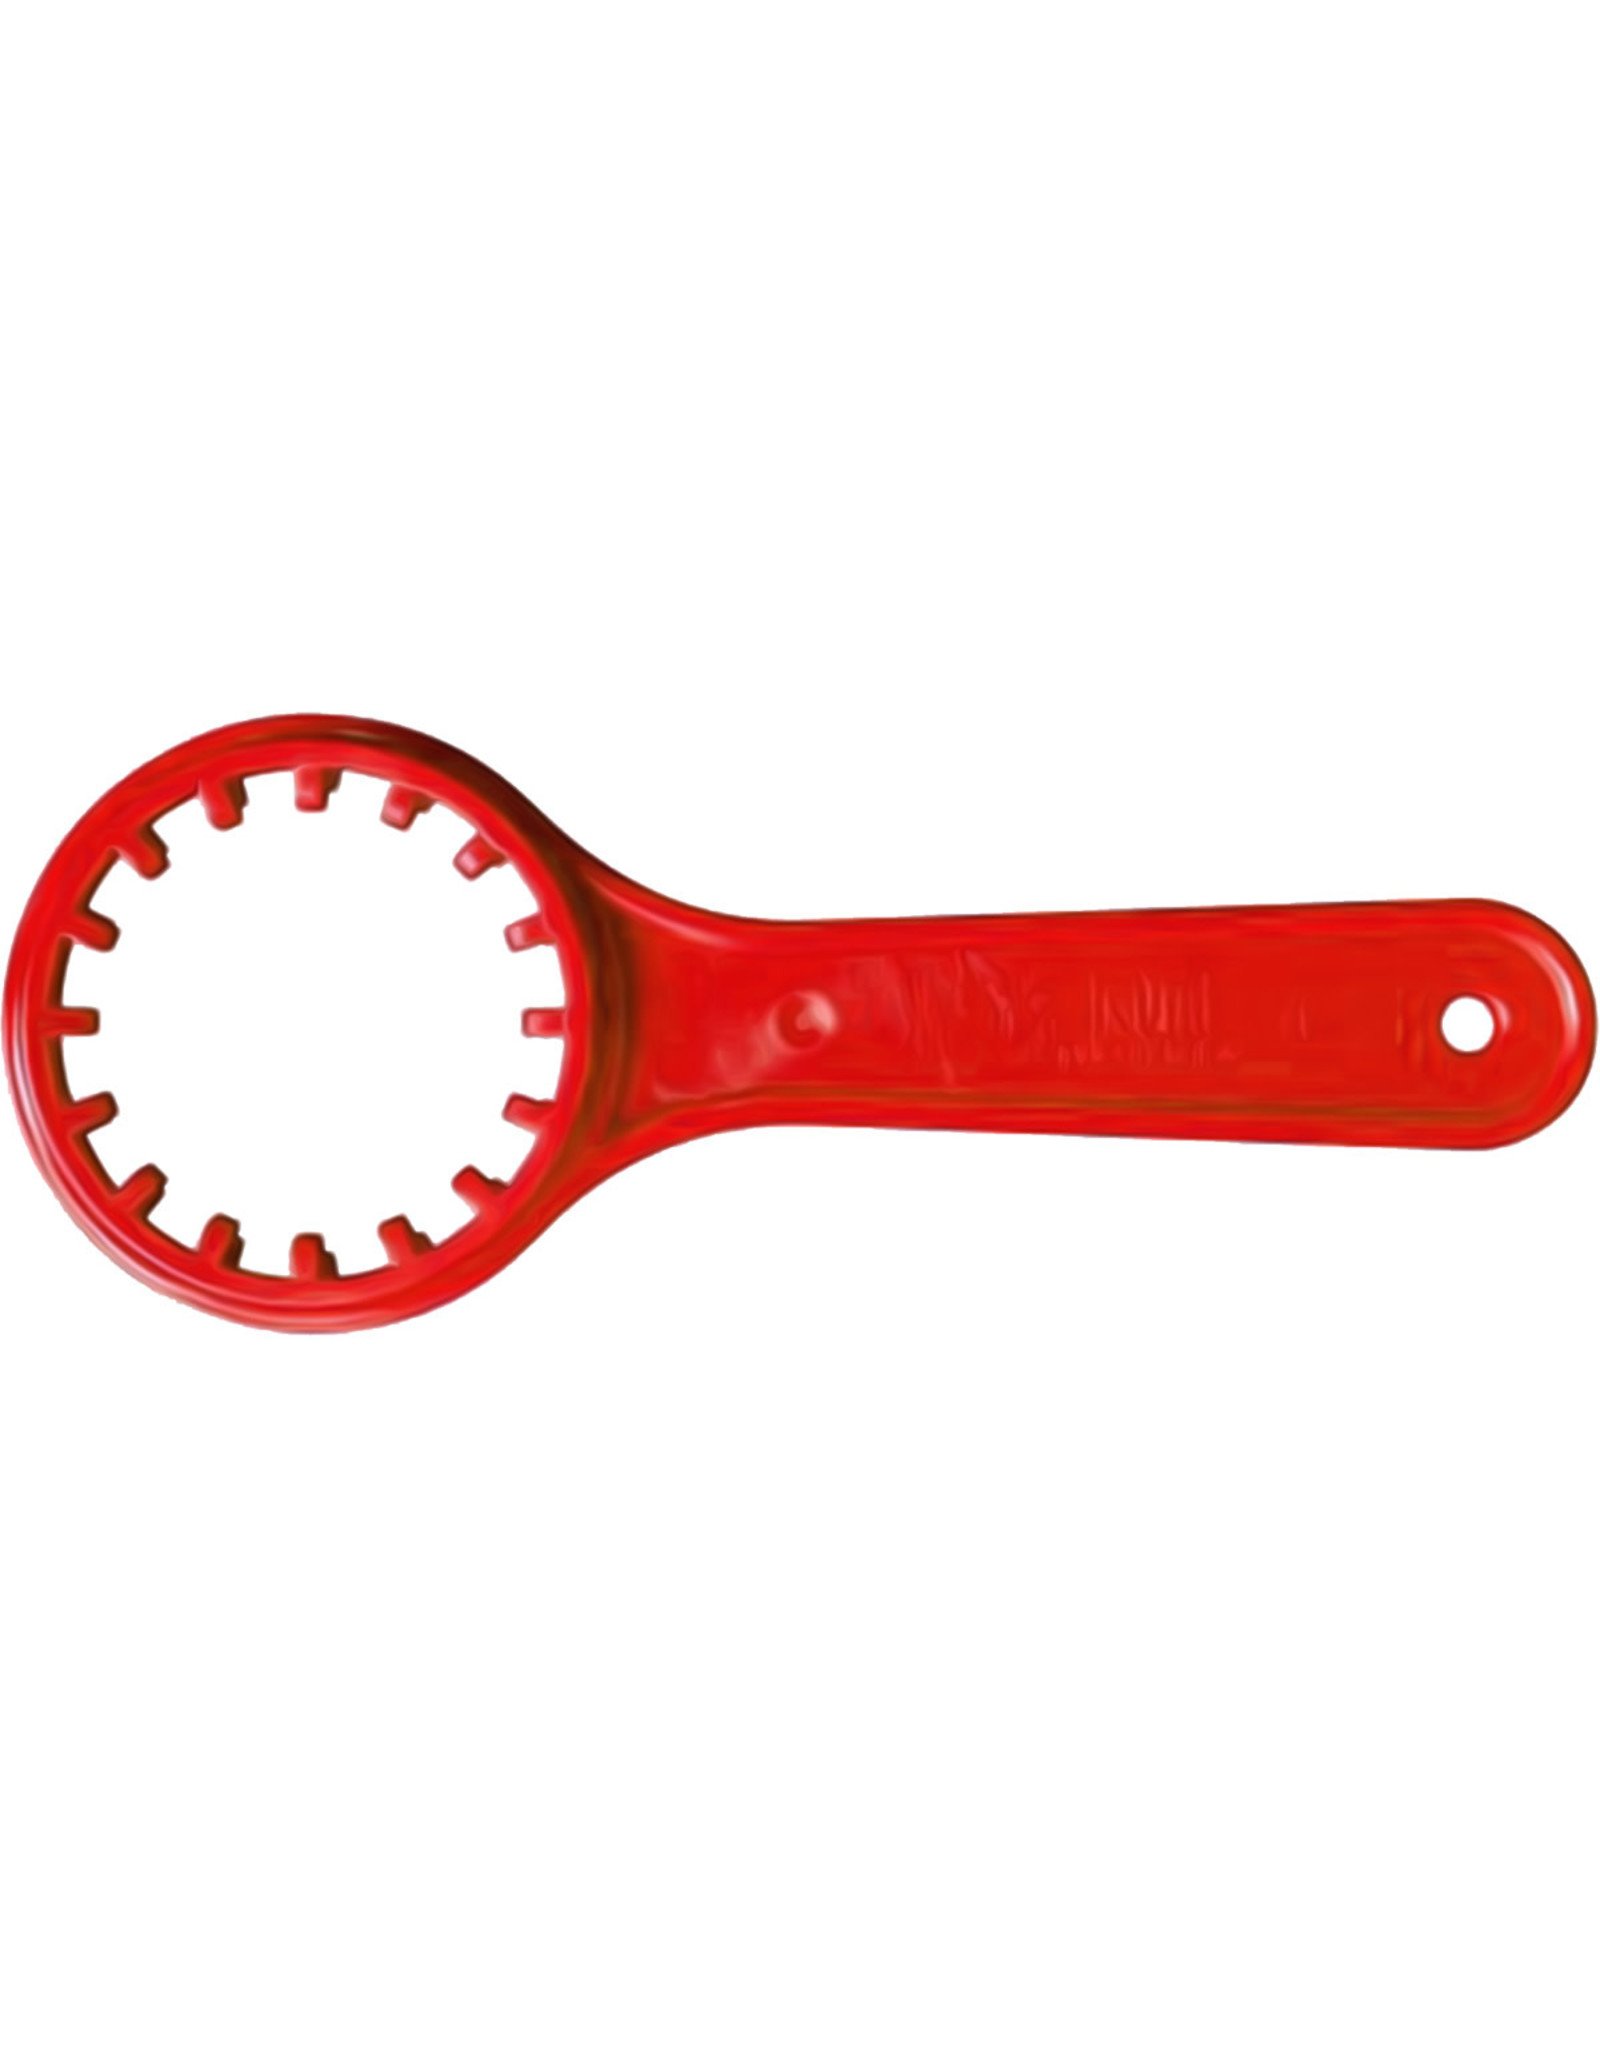 House & Garden House and Garden Bottle Wrench, Red